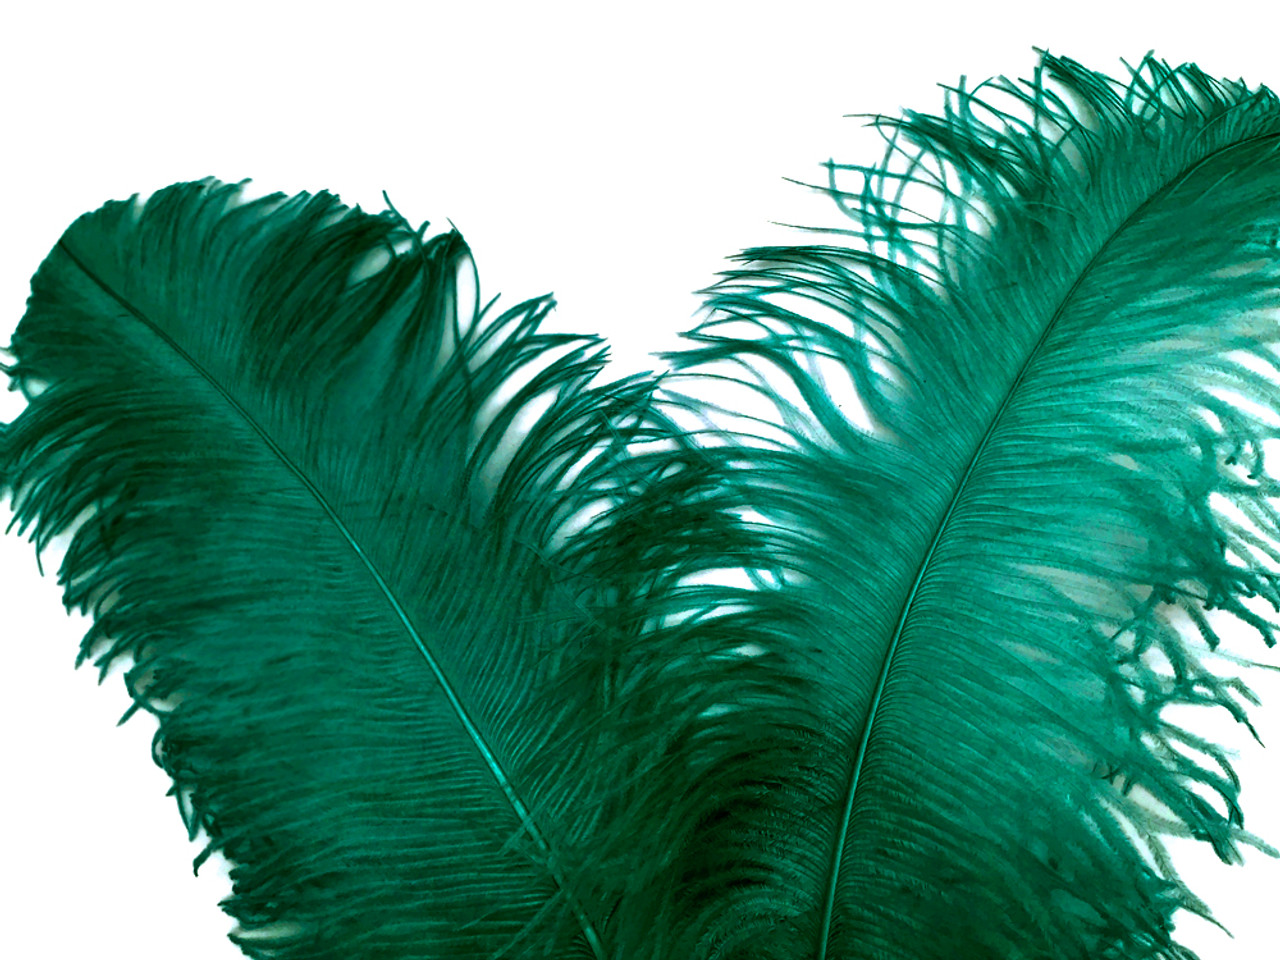 1/2lb - 25-29 Teal green Large Wing Plumes Wholesale Feather (bulk) SWA